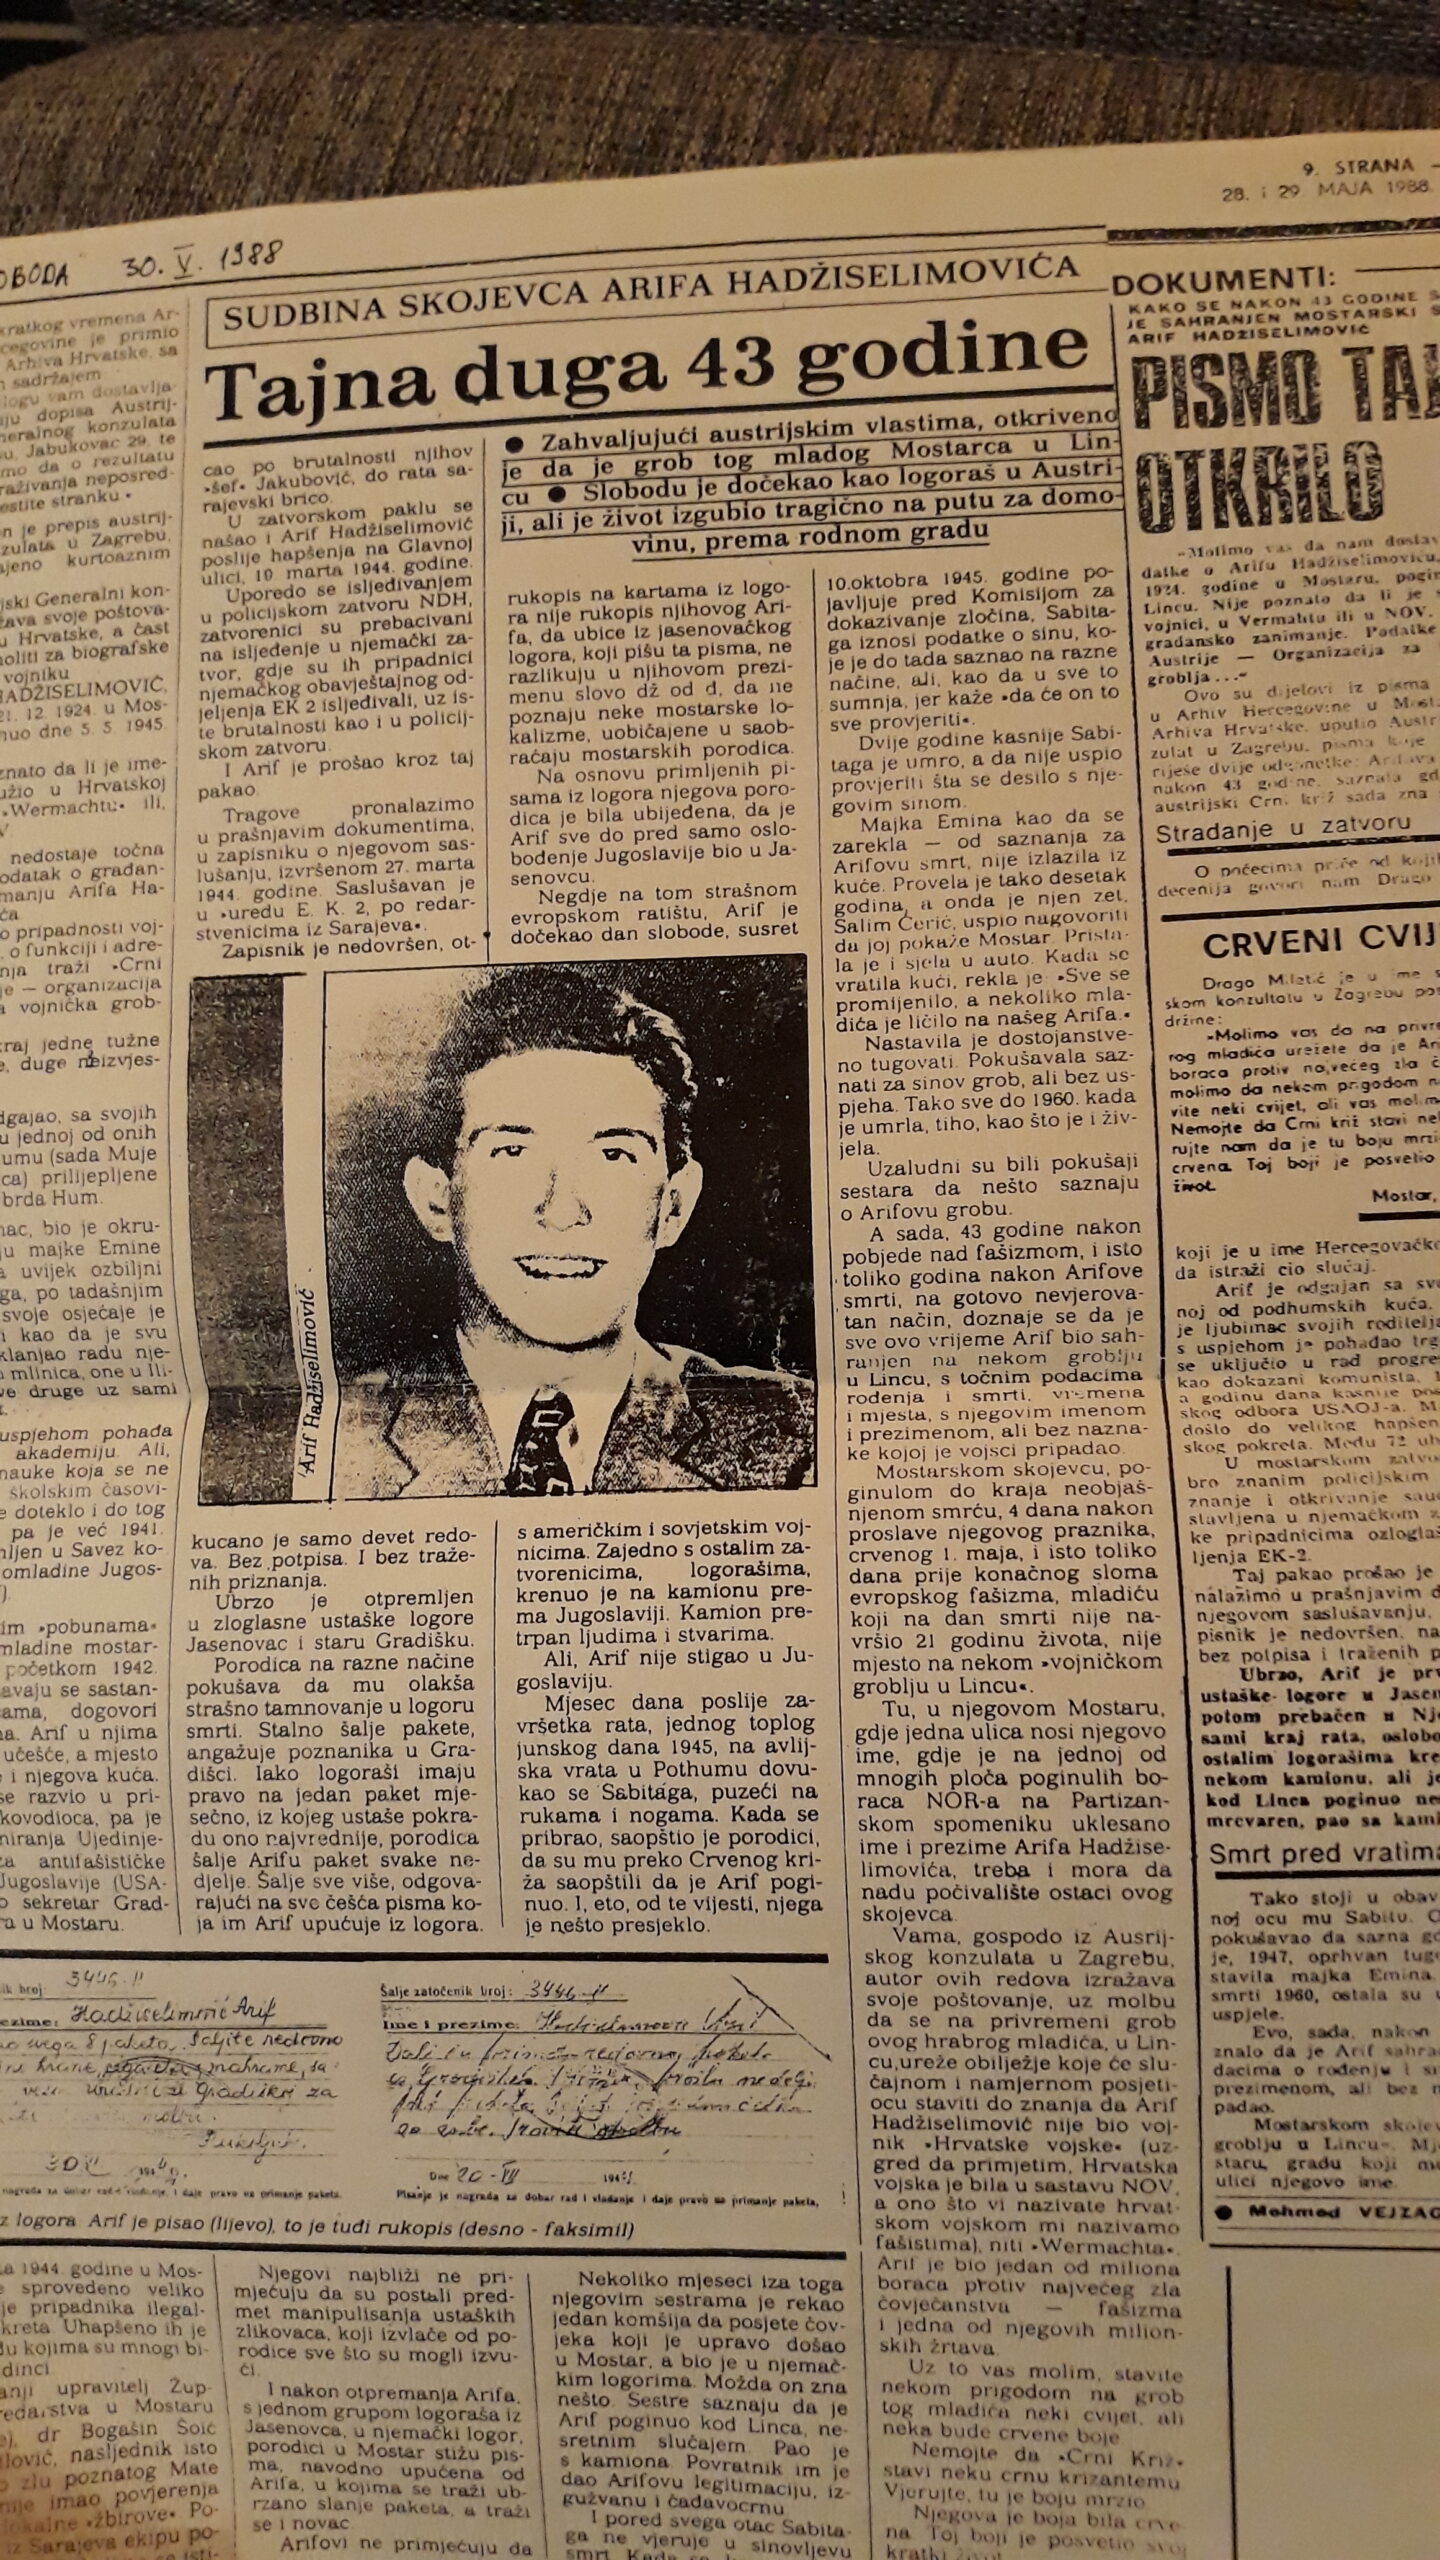 an article about Arif Hadžiselimović from 1988.